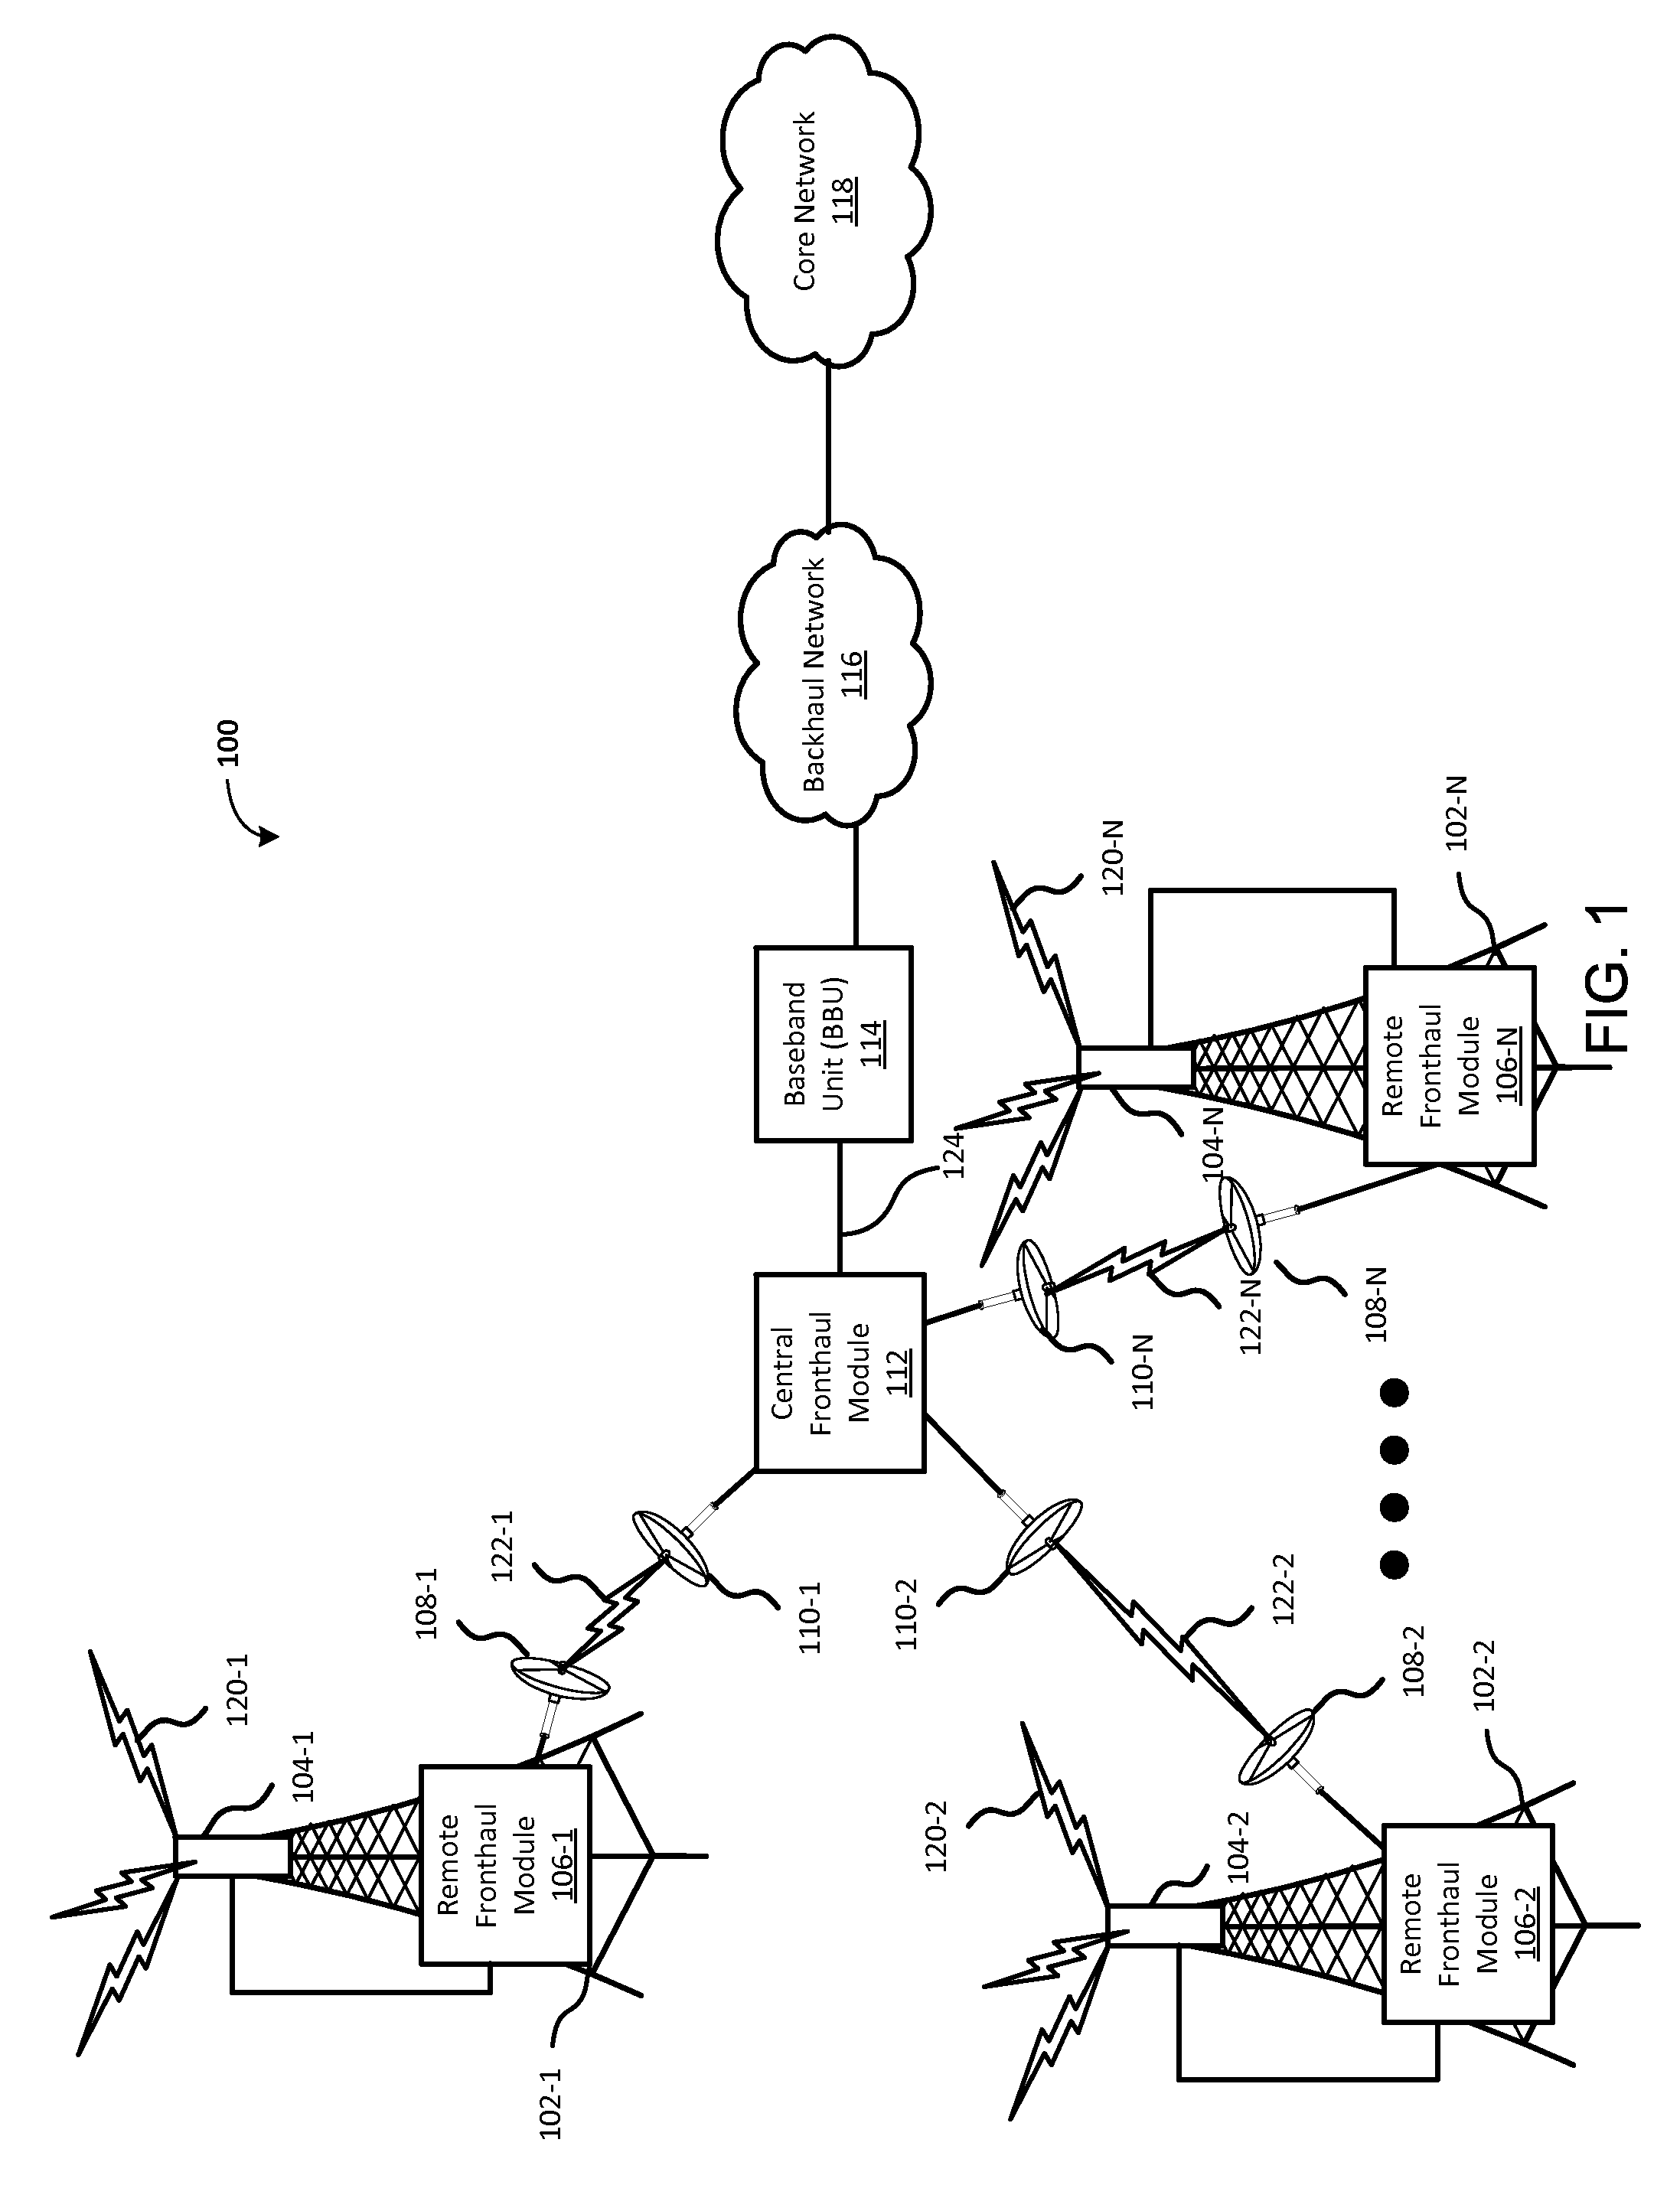 Systems and methods for a fronthaul network